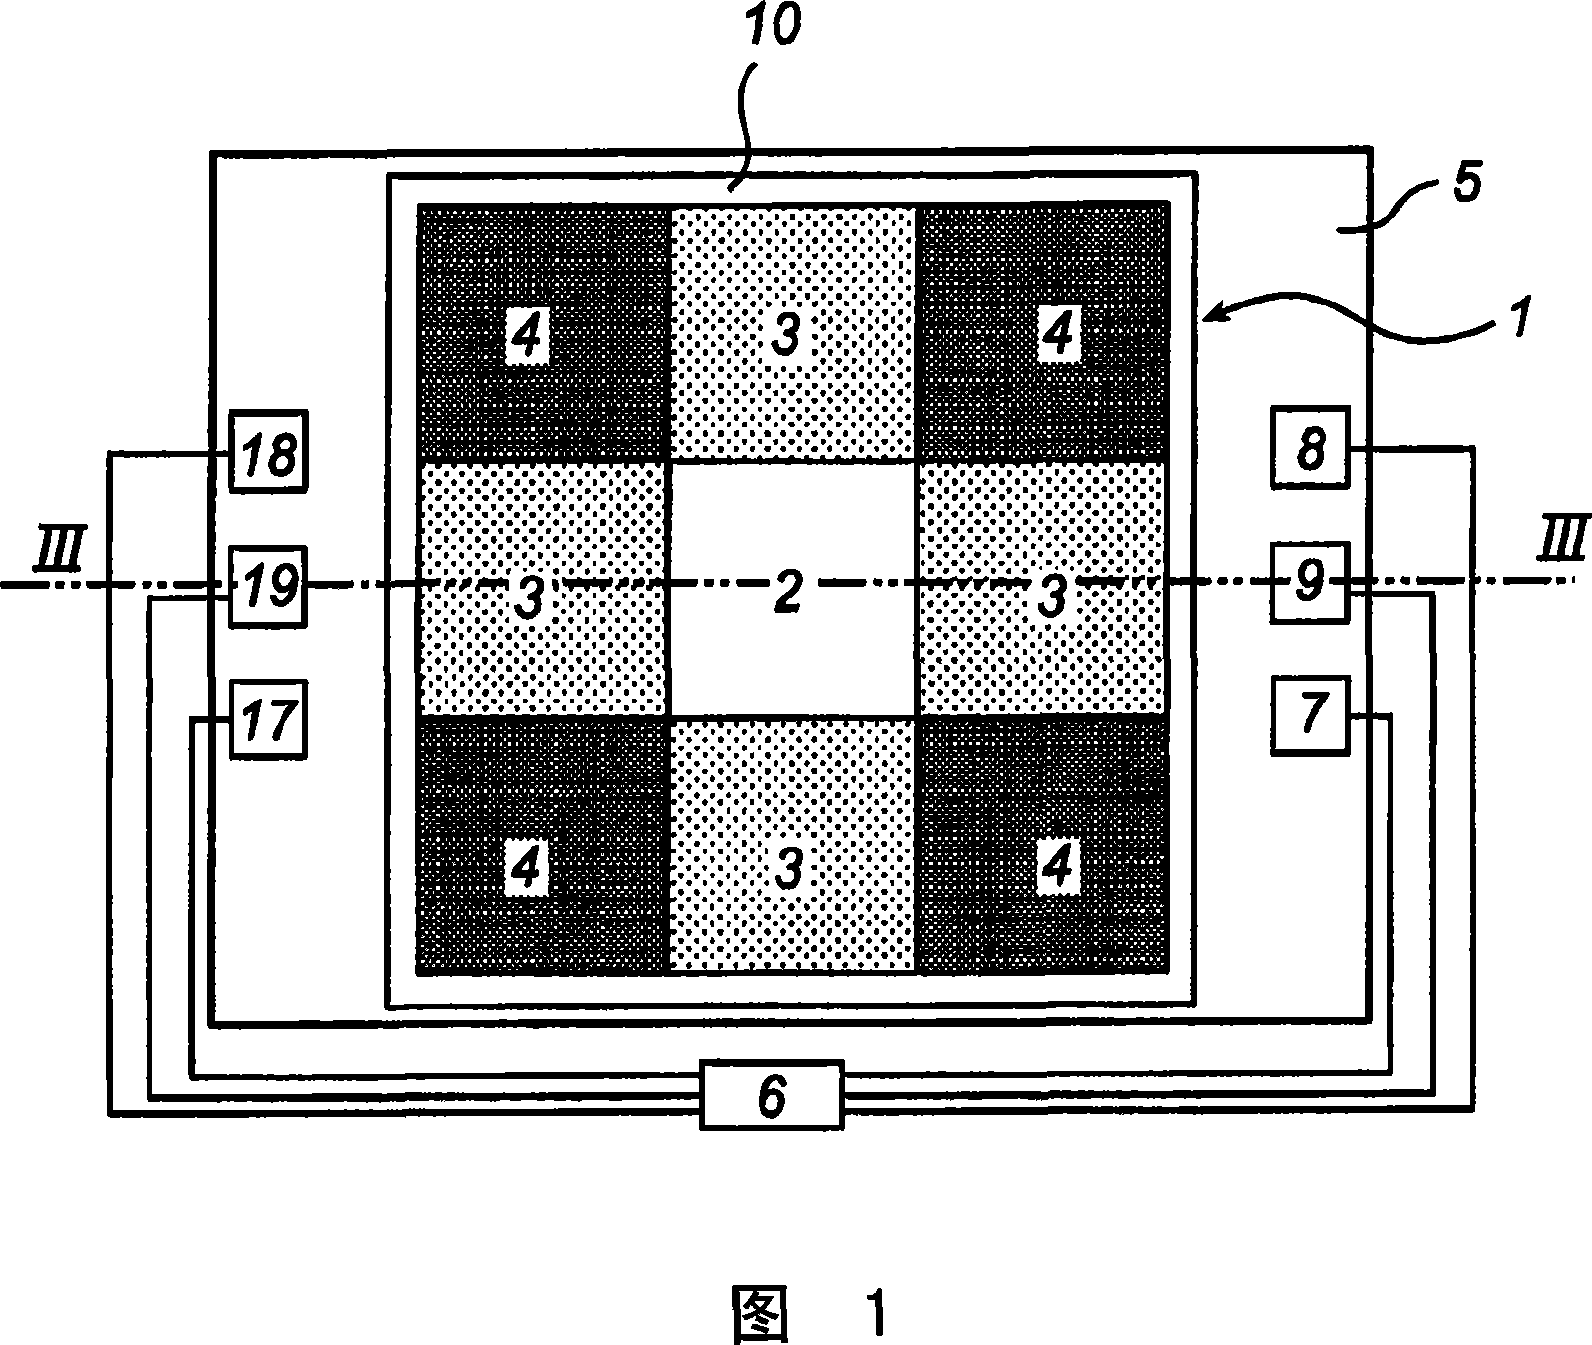 Single chip LED as compact color variable light source